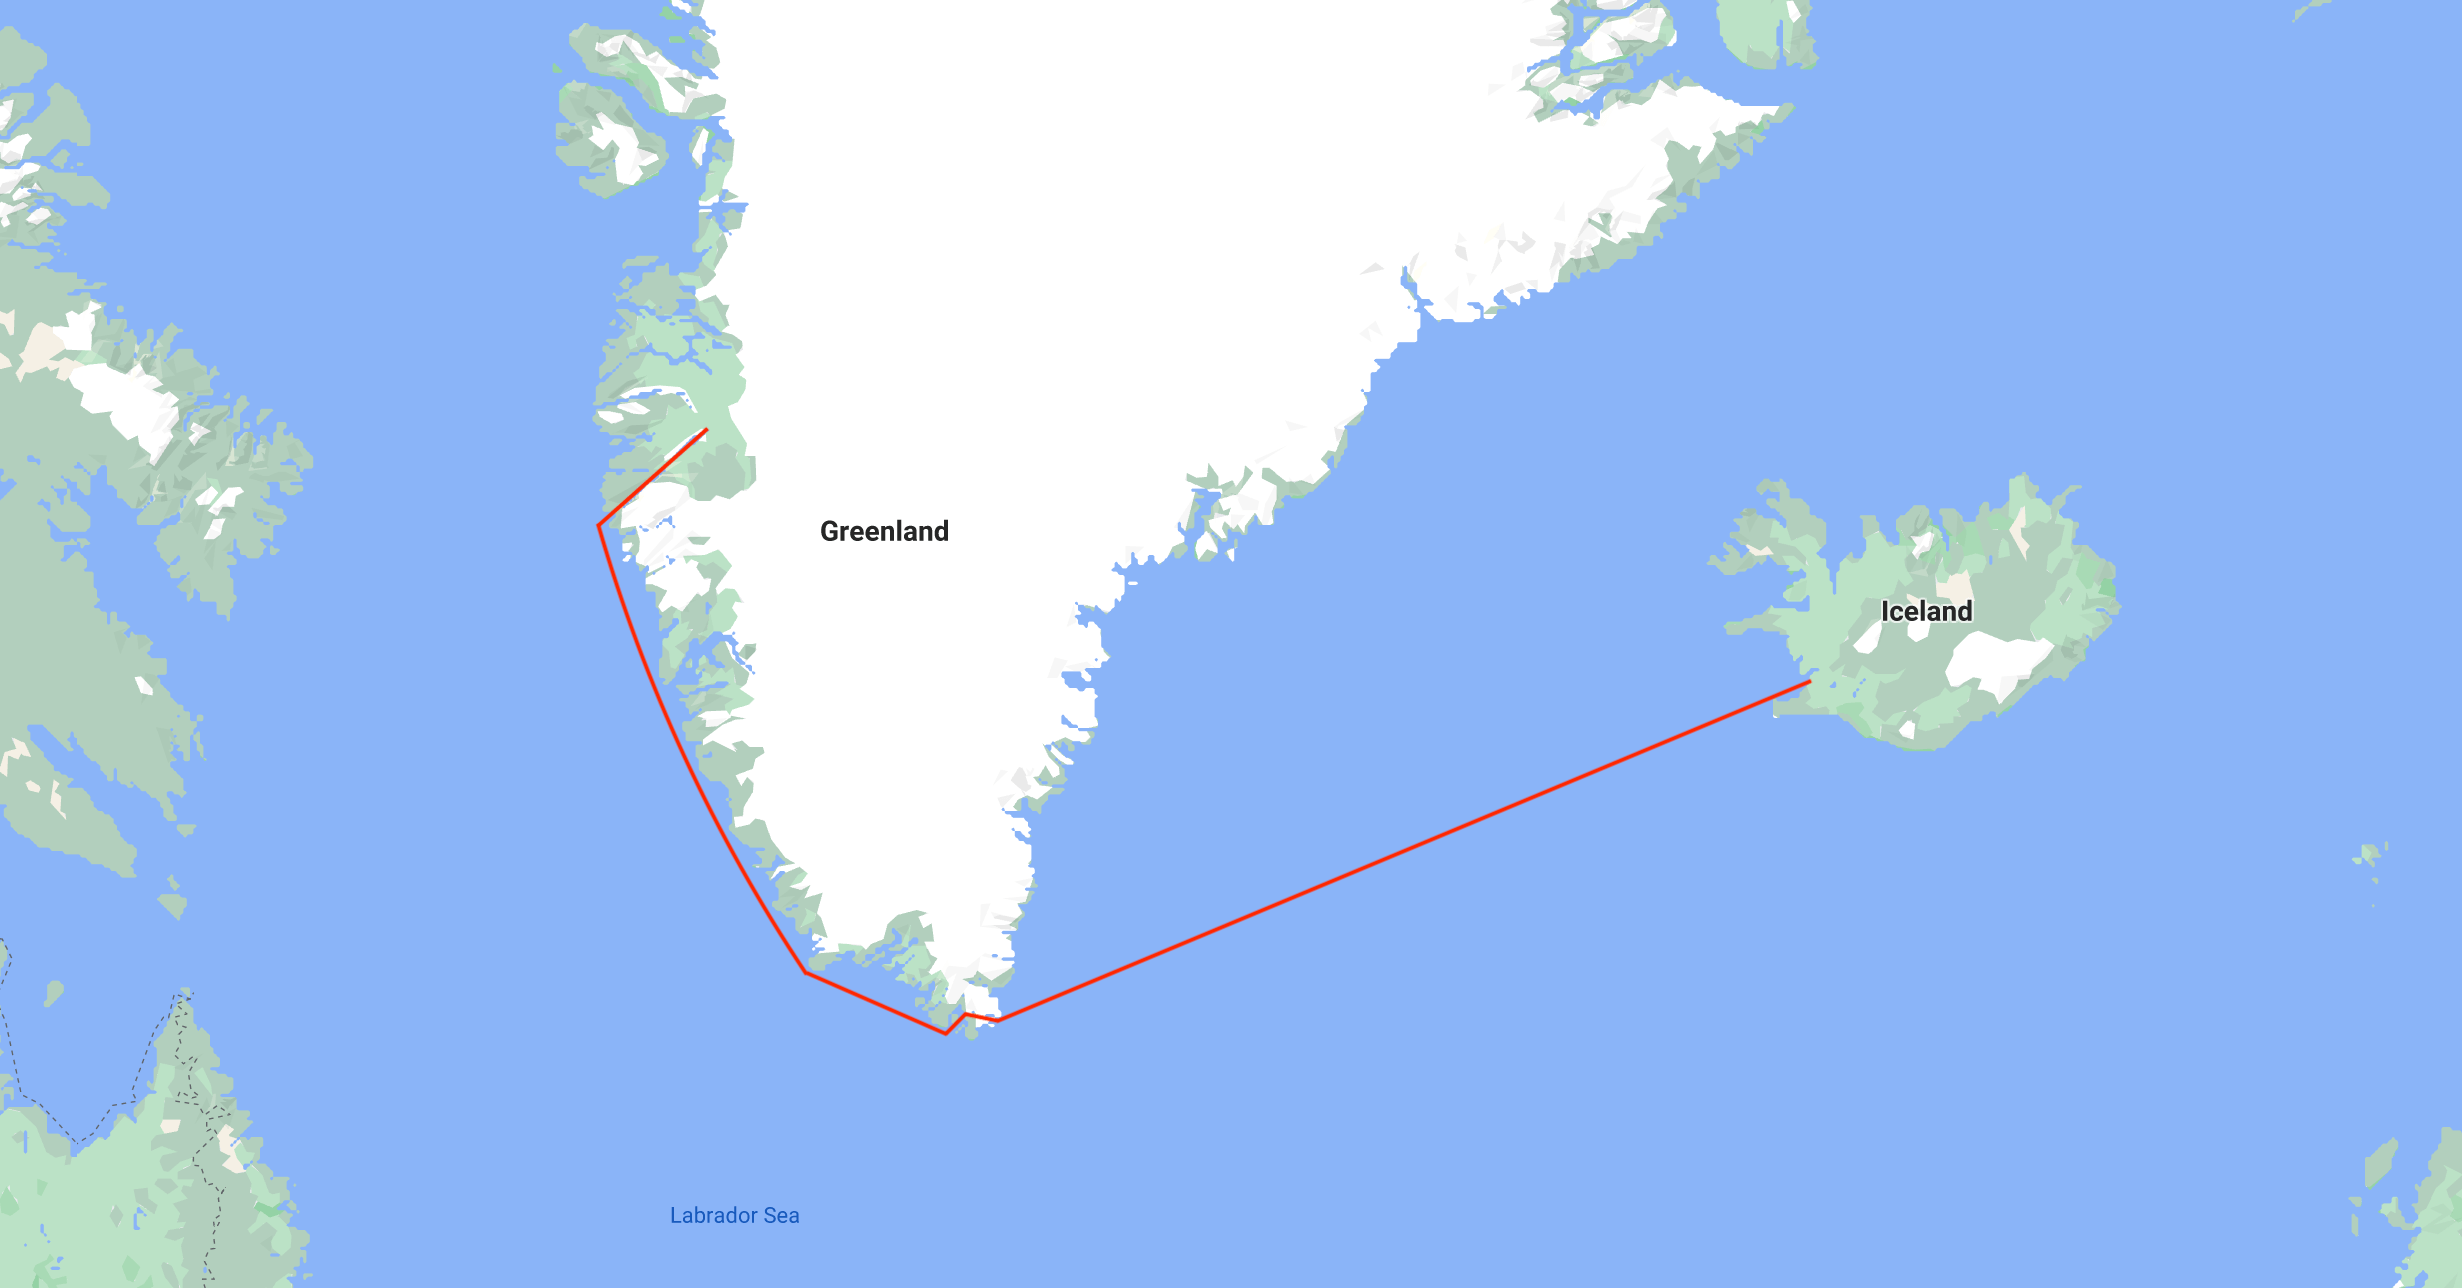 The 1300nm (2400km) route from Reykjavik to Kangerlussuaq.